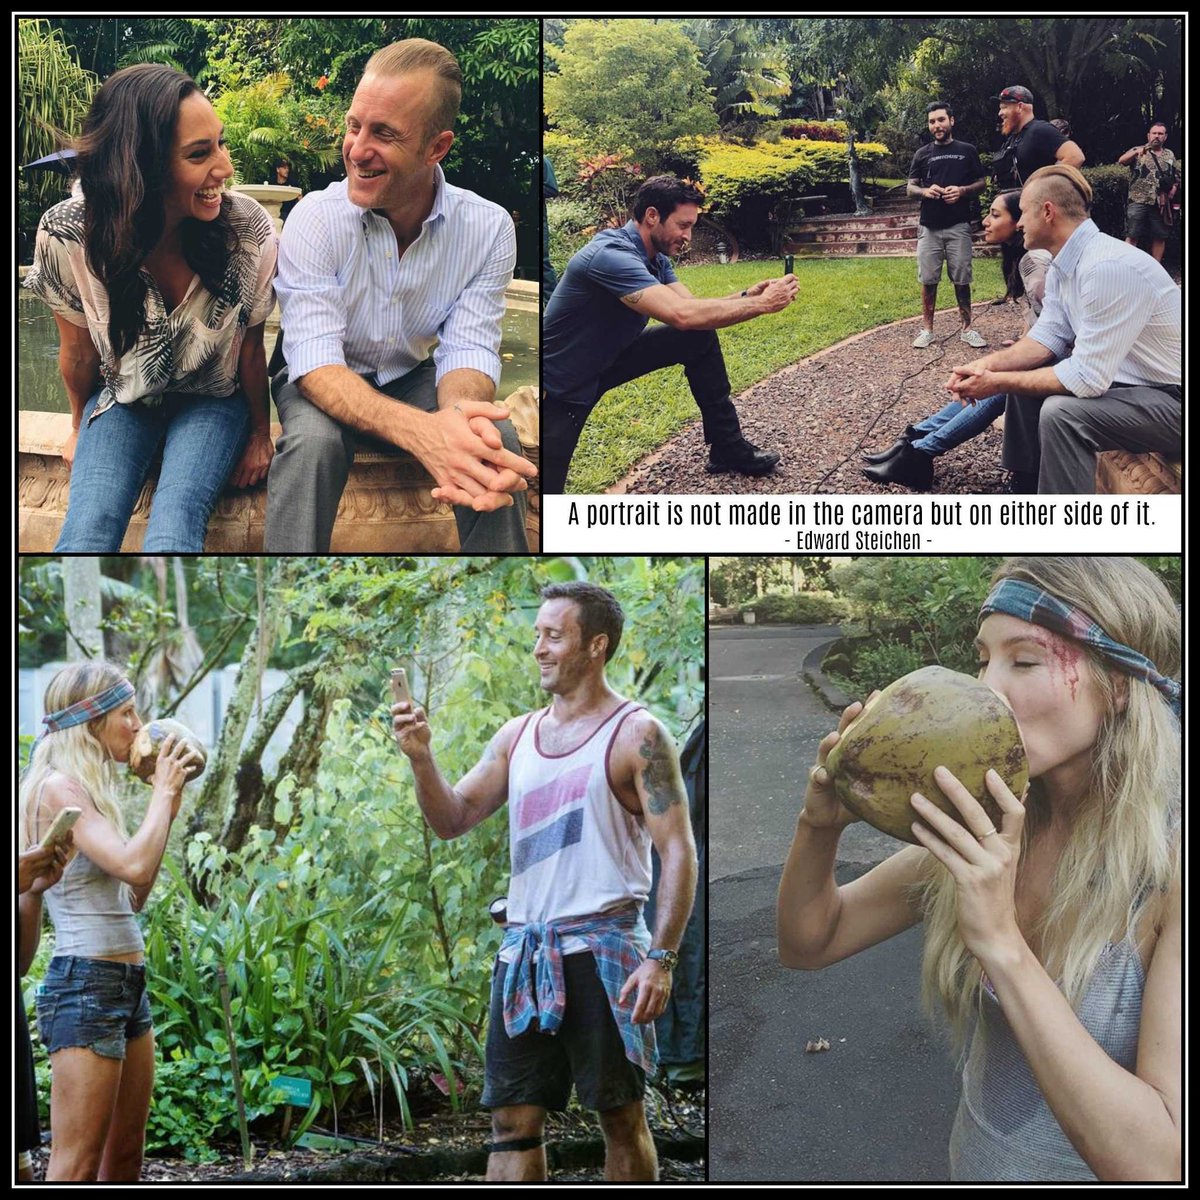 Photos by #AlexOLoughlin

I realize I always tag pictures like this #BTS for #BehindTheScenes but sometimes I think it's really telling the story #BehindTheSmiles.

#ScottCaan #MeaghanRath #SarahCarter #H50